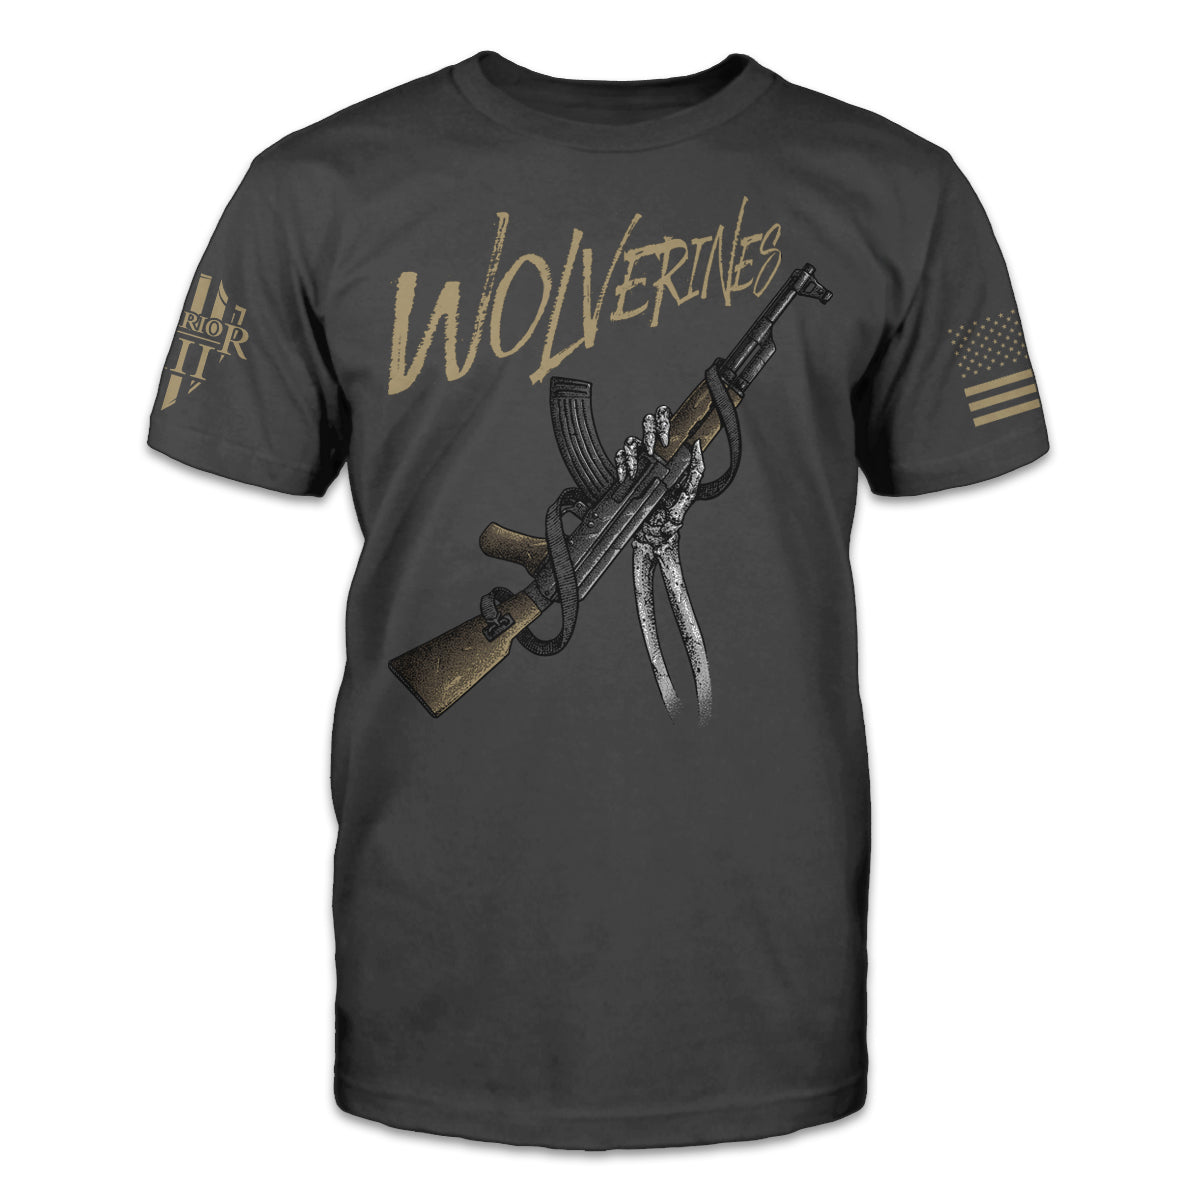 A dark grey t-shirt with the word "Wolverines" and a skeleton arm holding a gun printed on the front of the shirt.